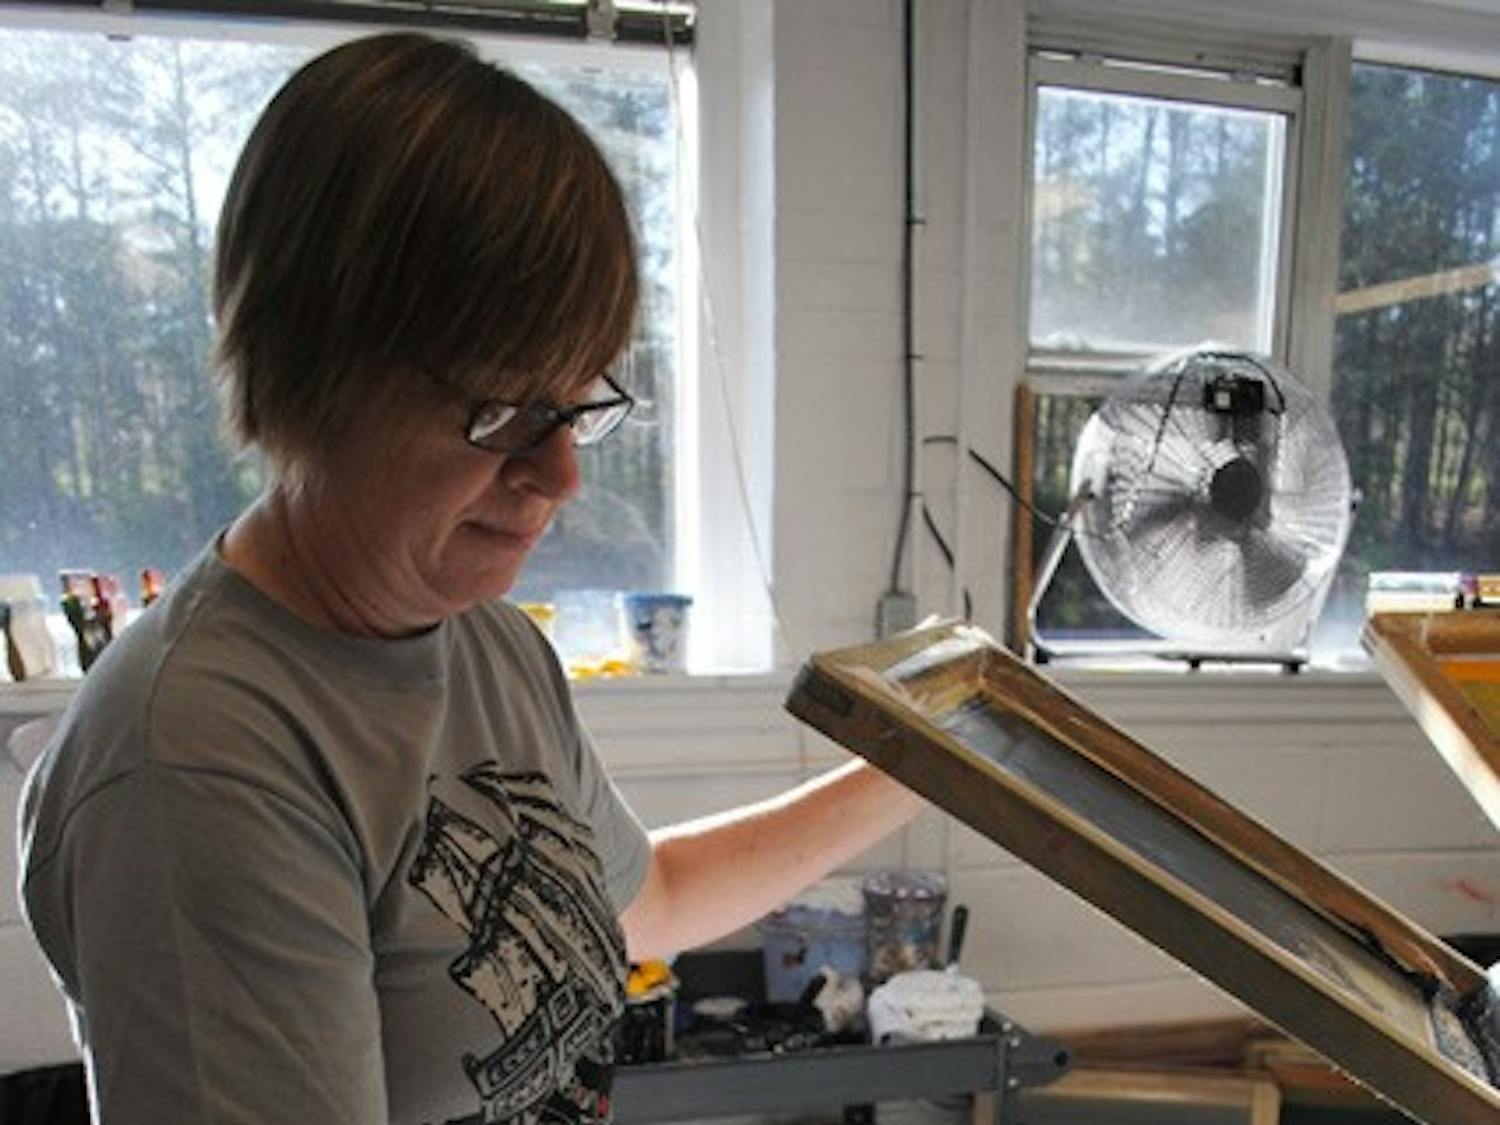 Melanie Wall, of Bread and Butter Screen Printing, prints a “Dead Mule Club” T-shirt at her shop in Chapel Hill on Wednesday.